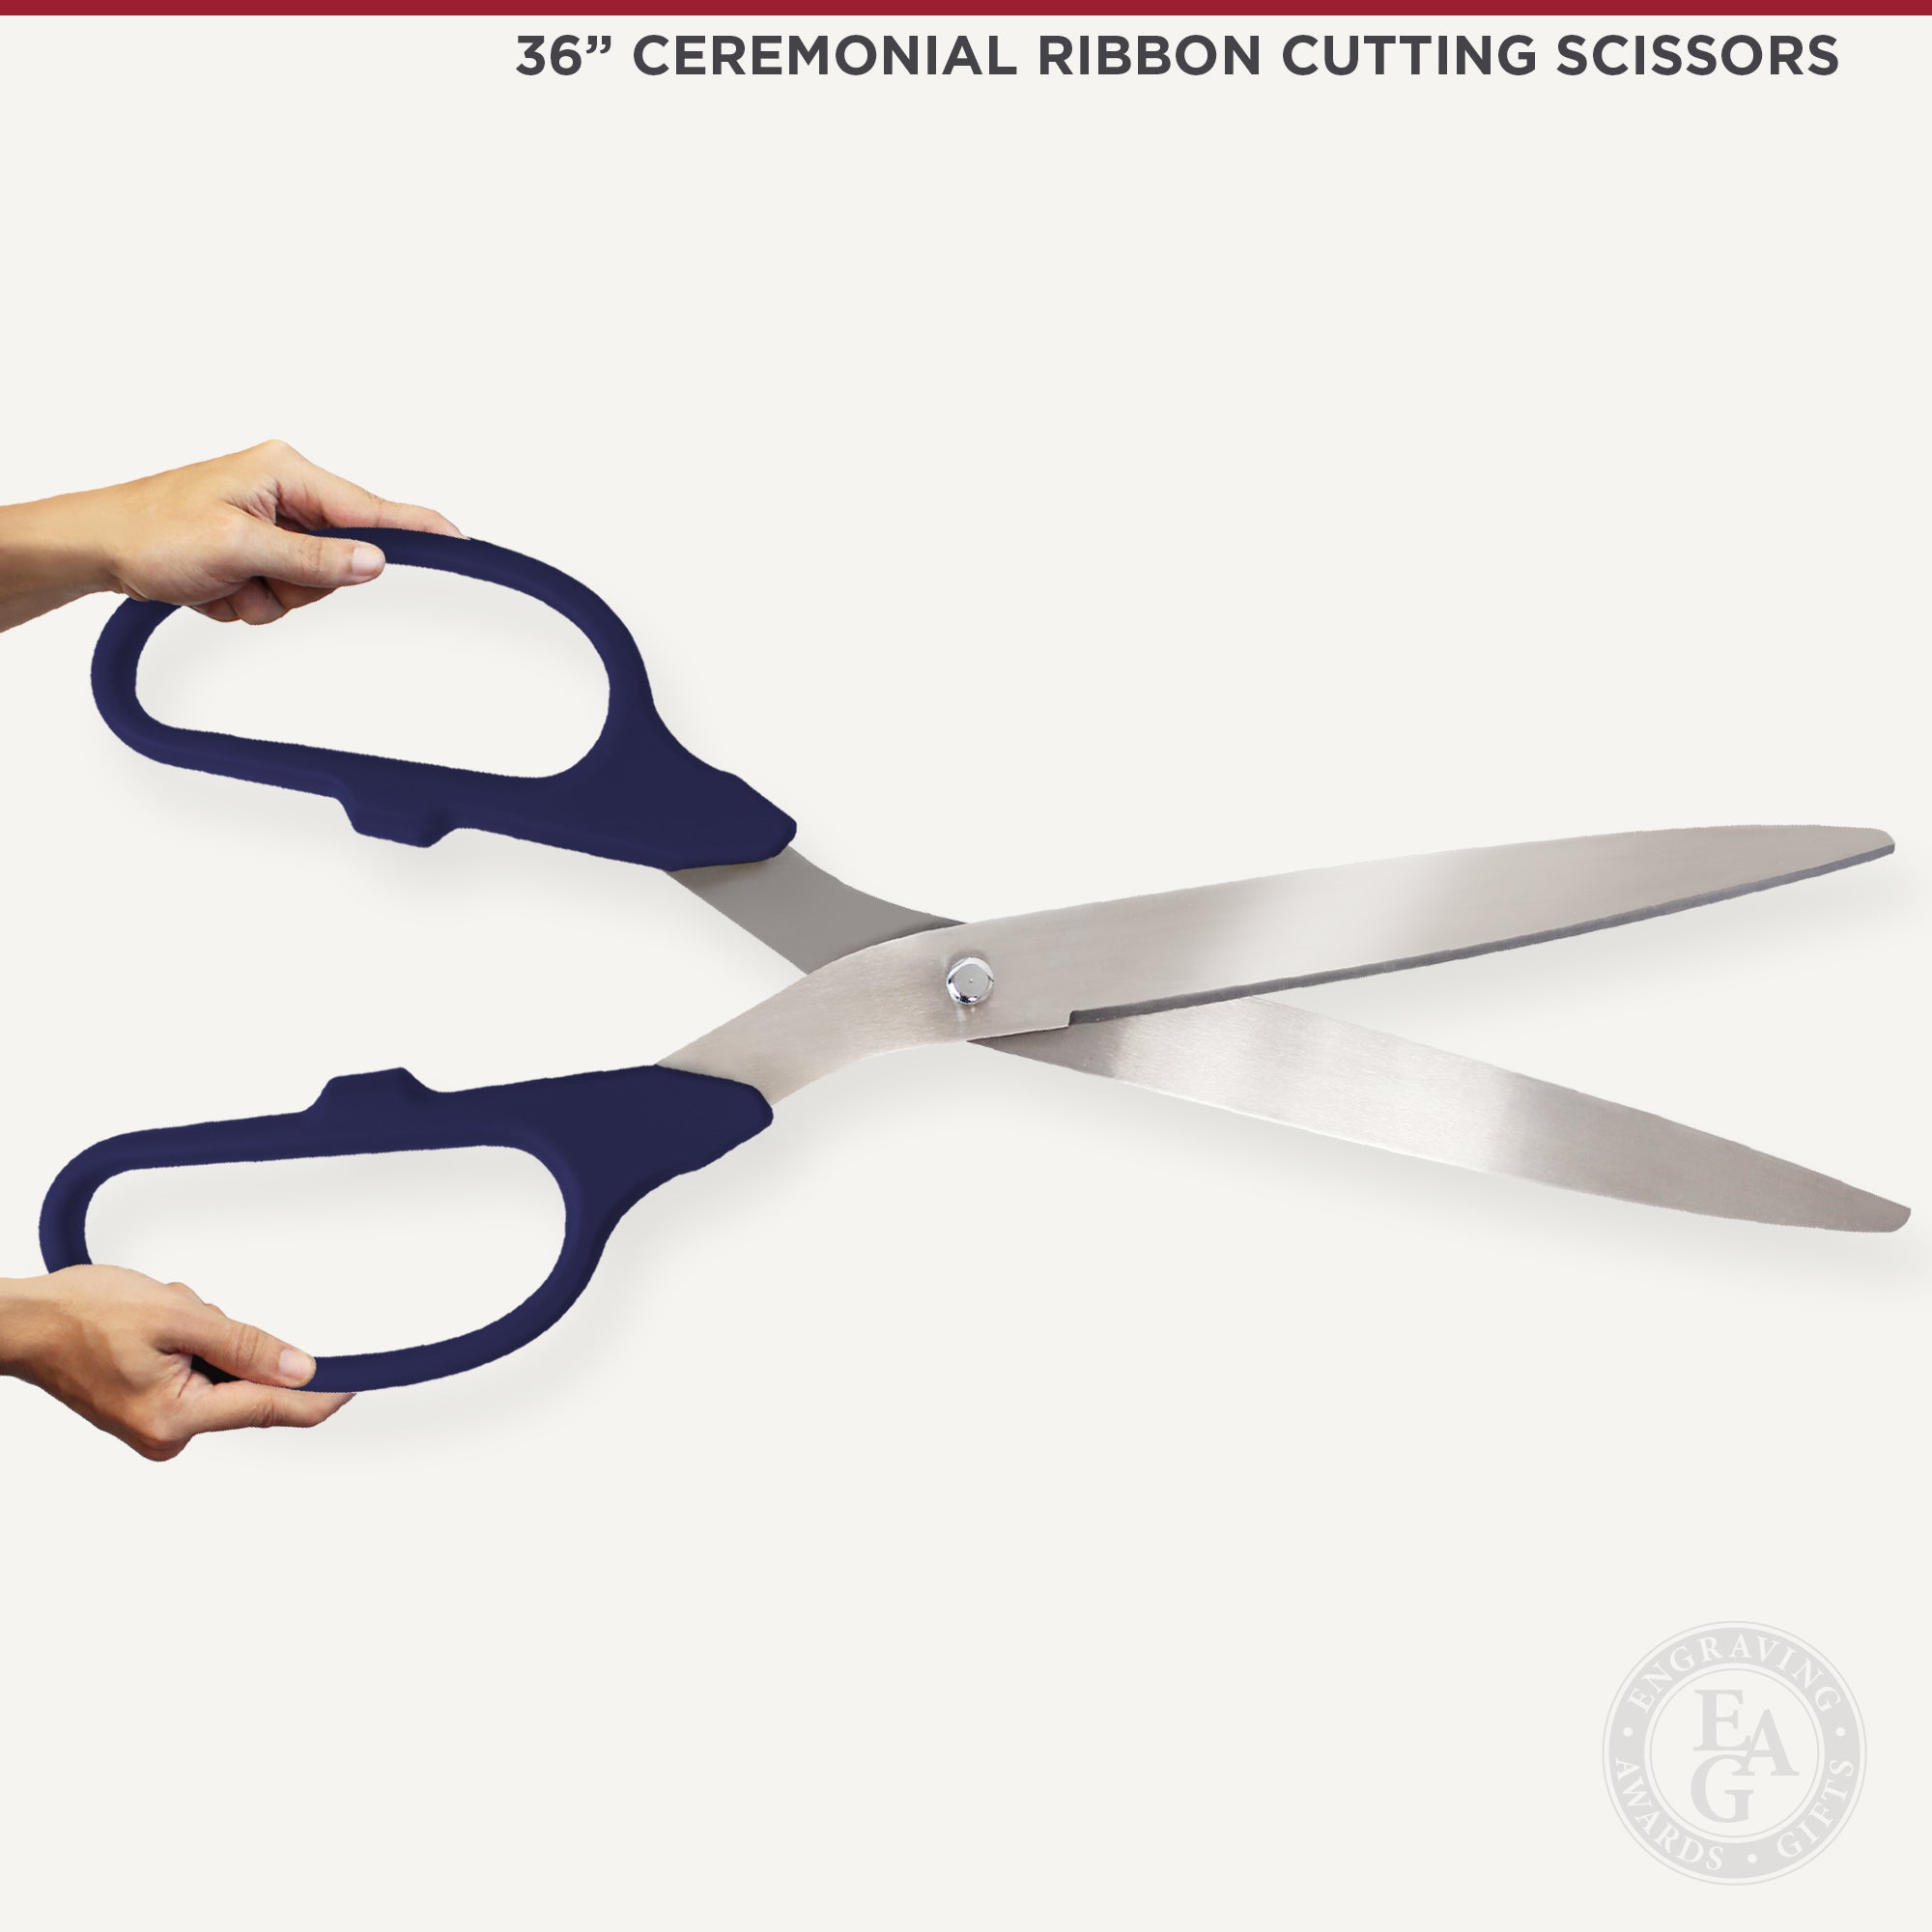  Grand Opening 3 Foot Ceremonial Giant Scissors for